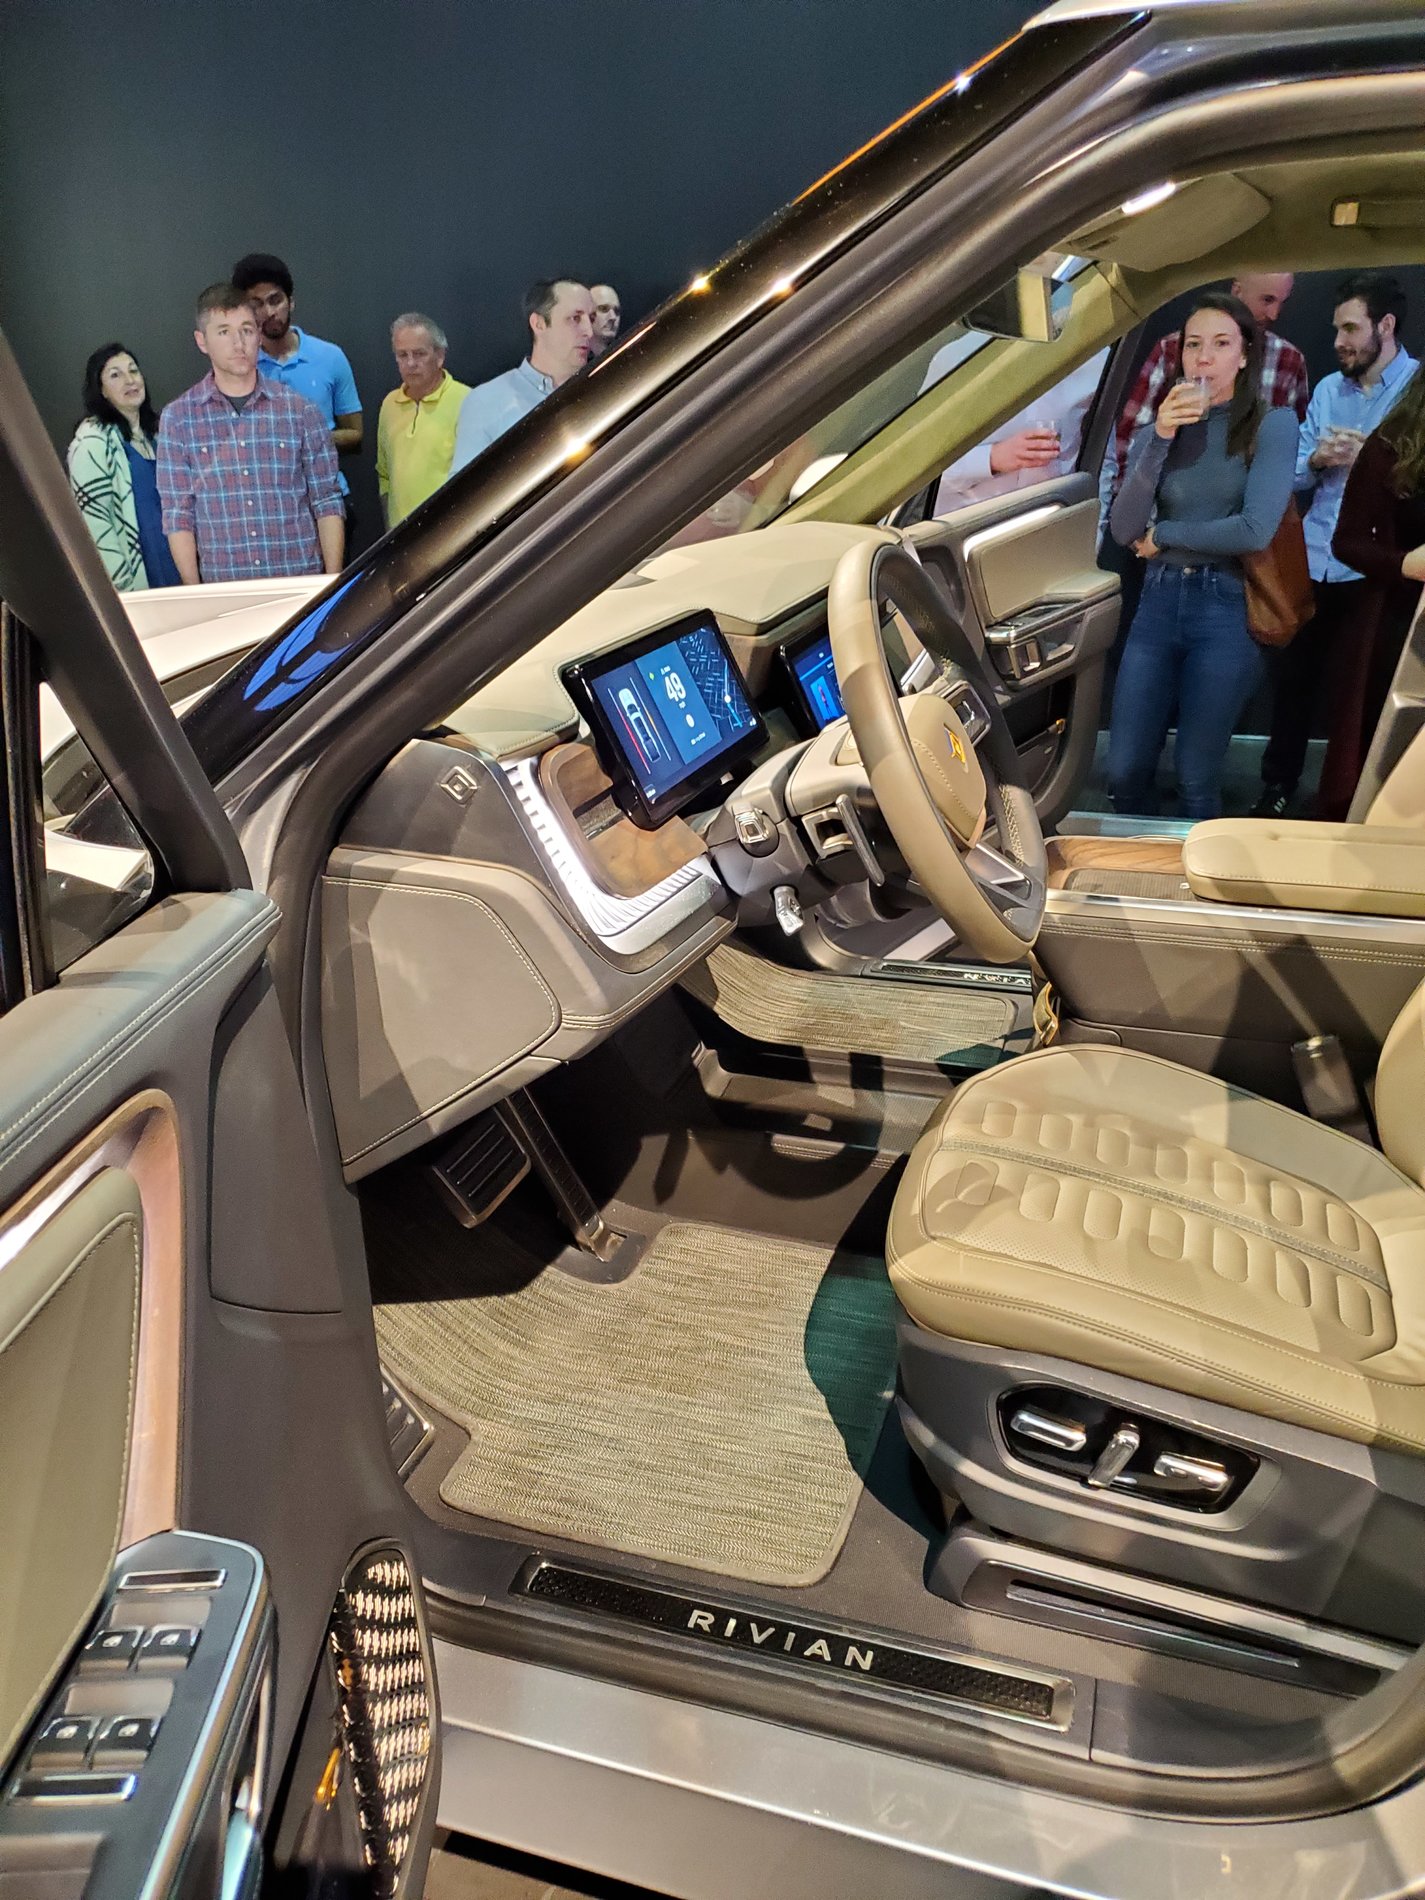 Rivian R1T R1S LIVE from Rivian's NY Auto Show Preview Event! (Q&A and R1T / R1S Hands-On) 20190412_191912